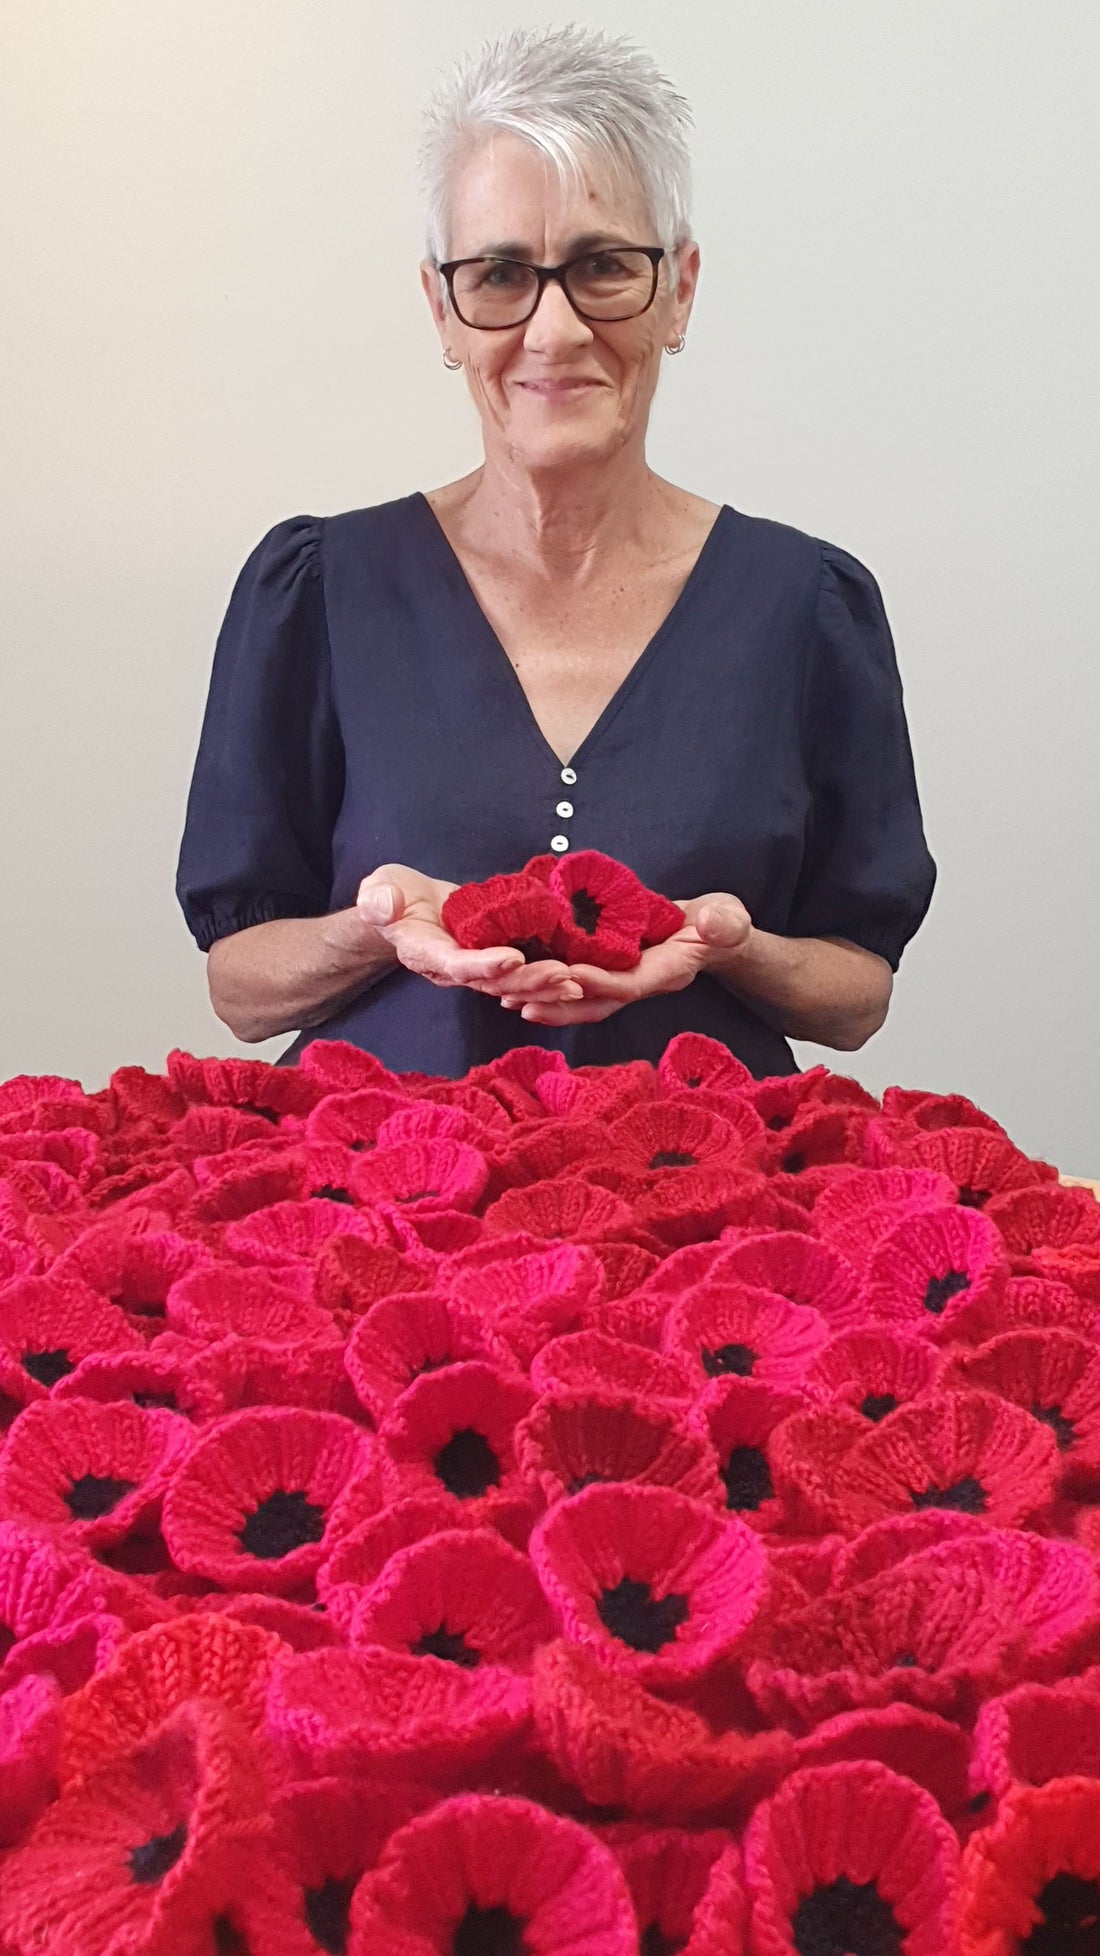 The largest collection of crocheted poppies